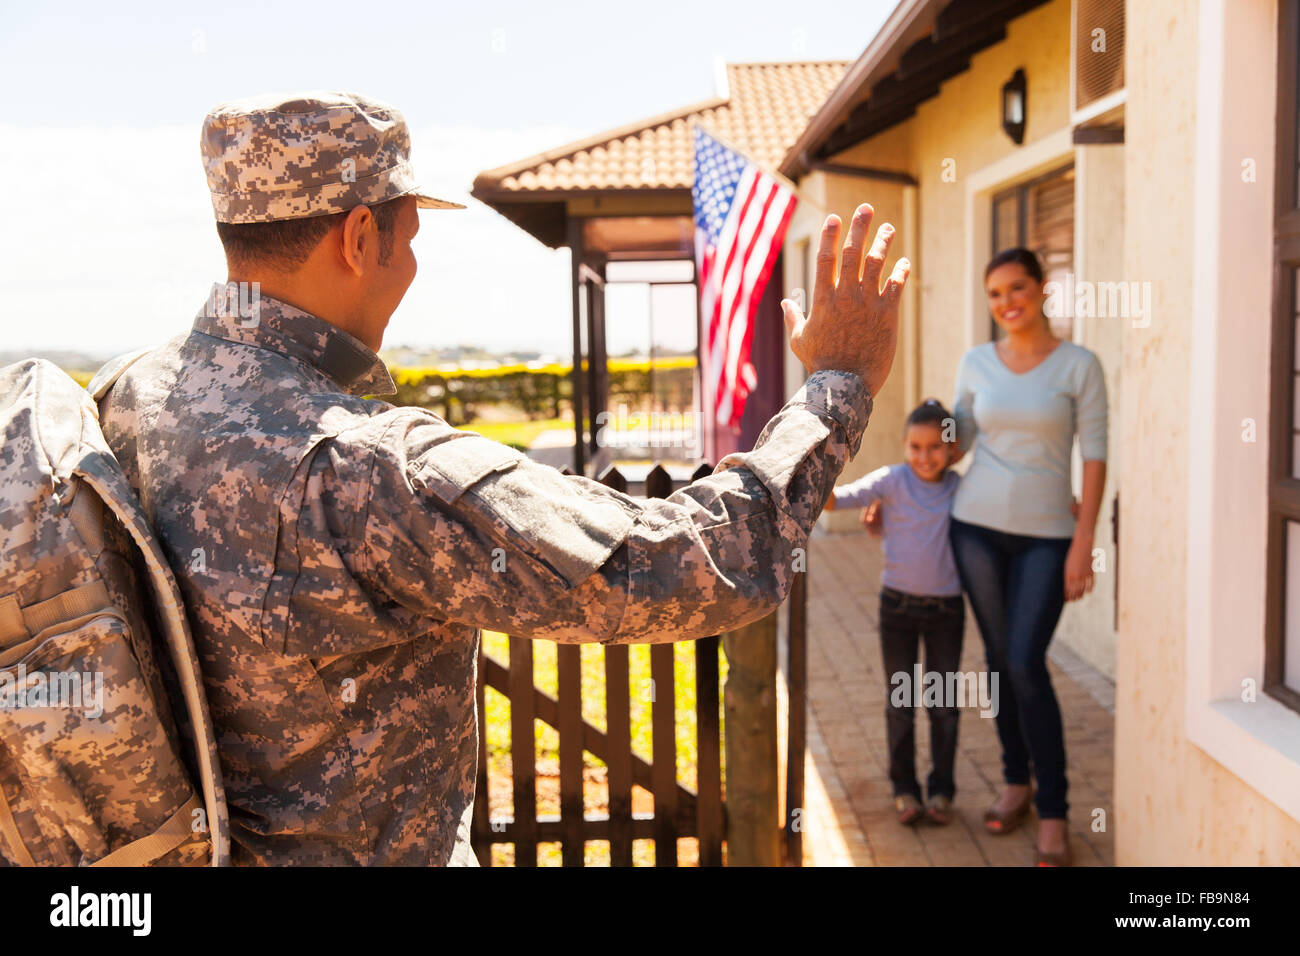 military soldier arriving home with family welcoming him Stock Photo